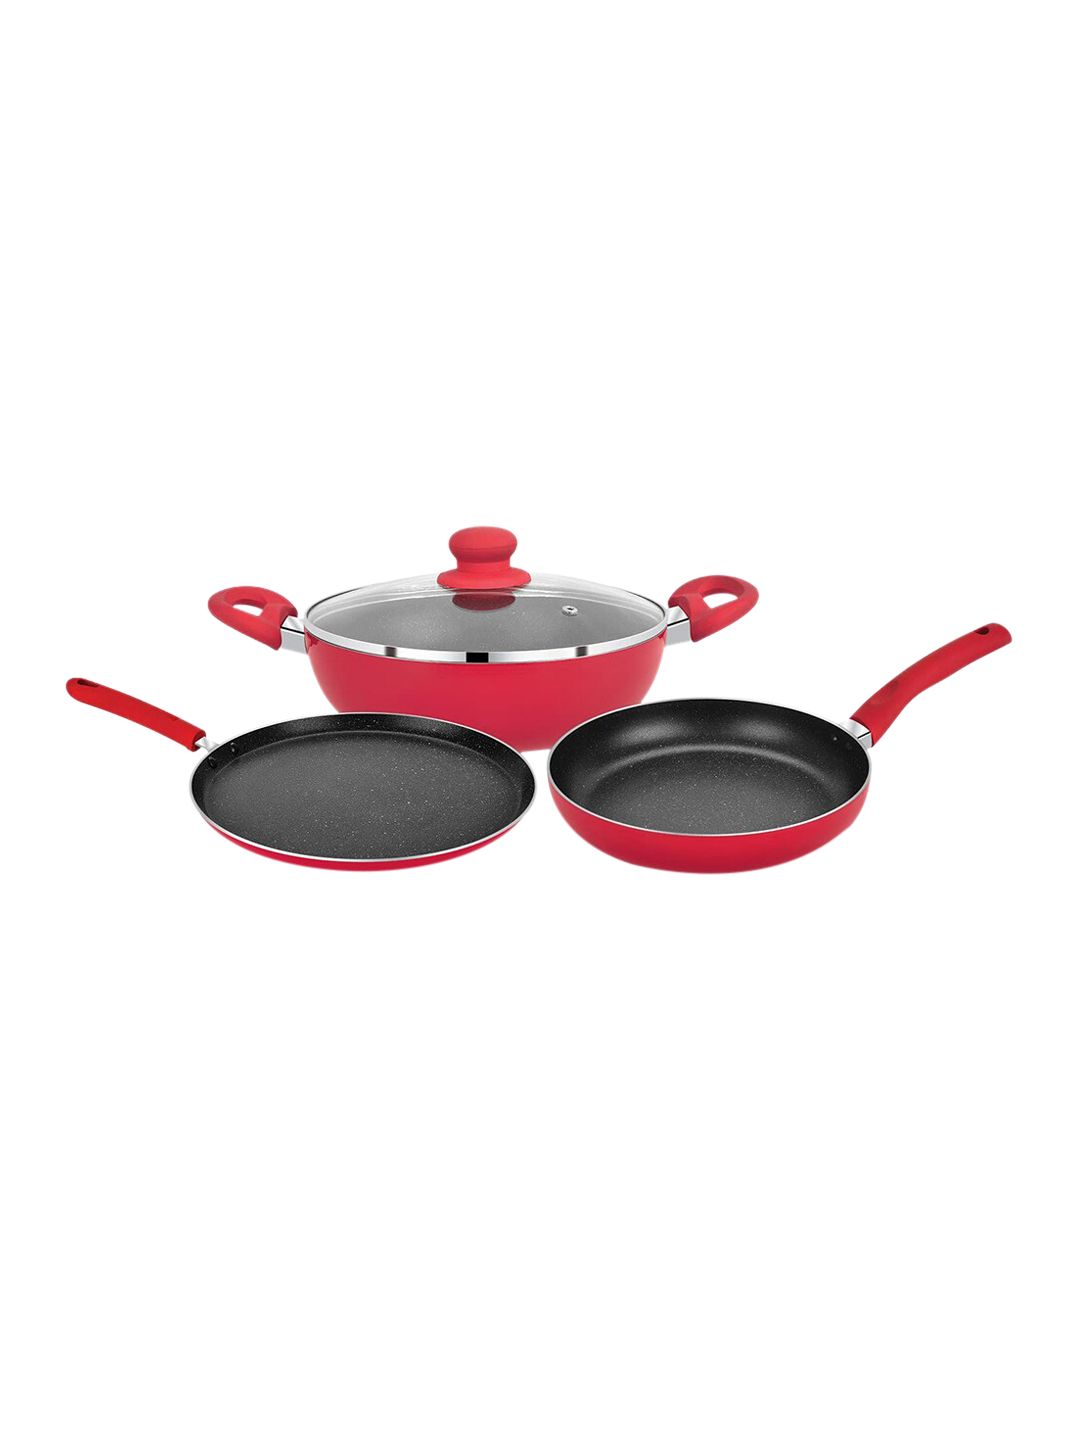 BERGNER Red Set Of 4 Red Non-Stick Cookware Set With Induction Base Price in India